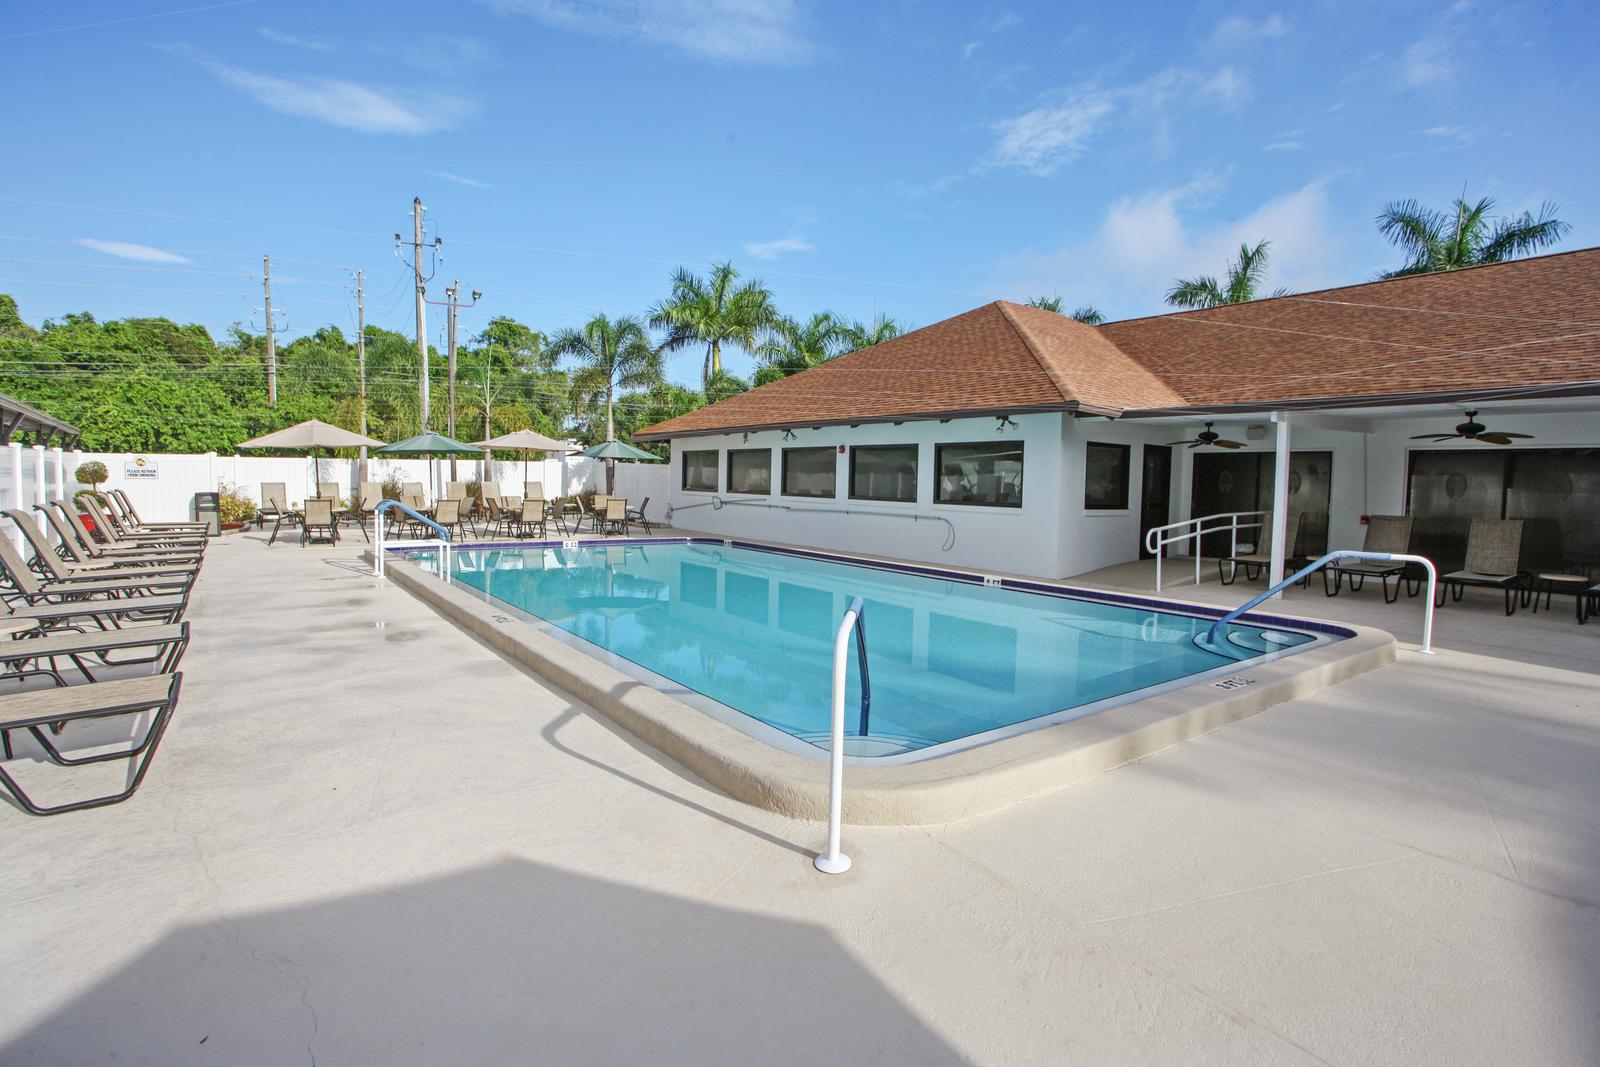 Calm swimming pool with lounge chairs and patio furniture with chairs, tables, and umbrellas. located outside clubhouse.